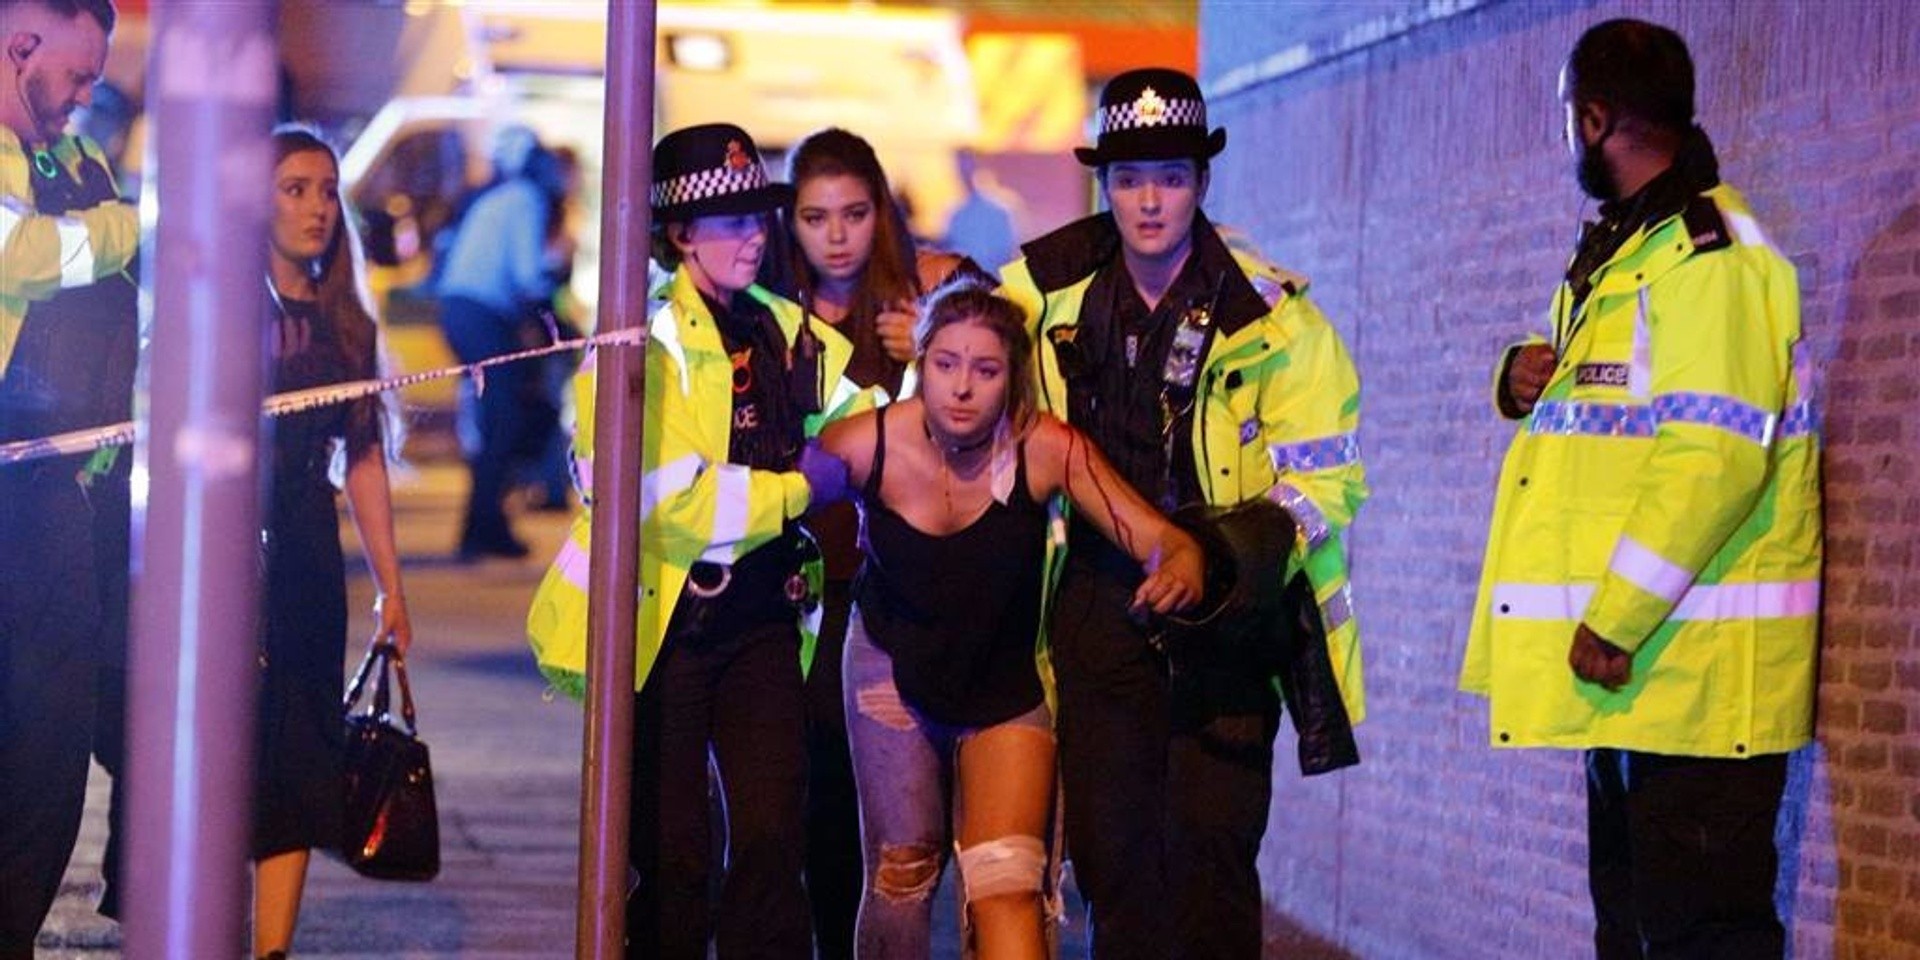 19 dead and 50 injured after terror attack at Ariana Grande concert